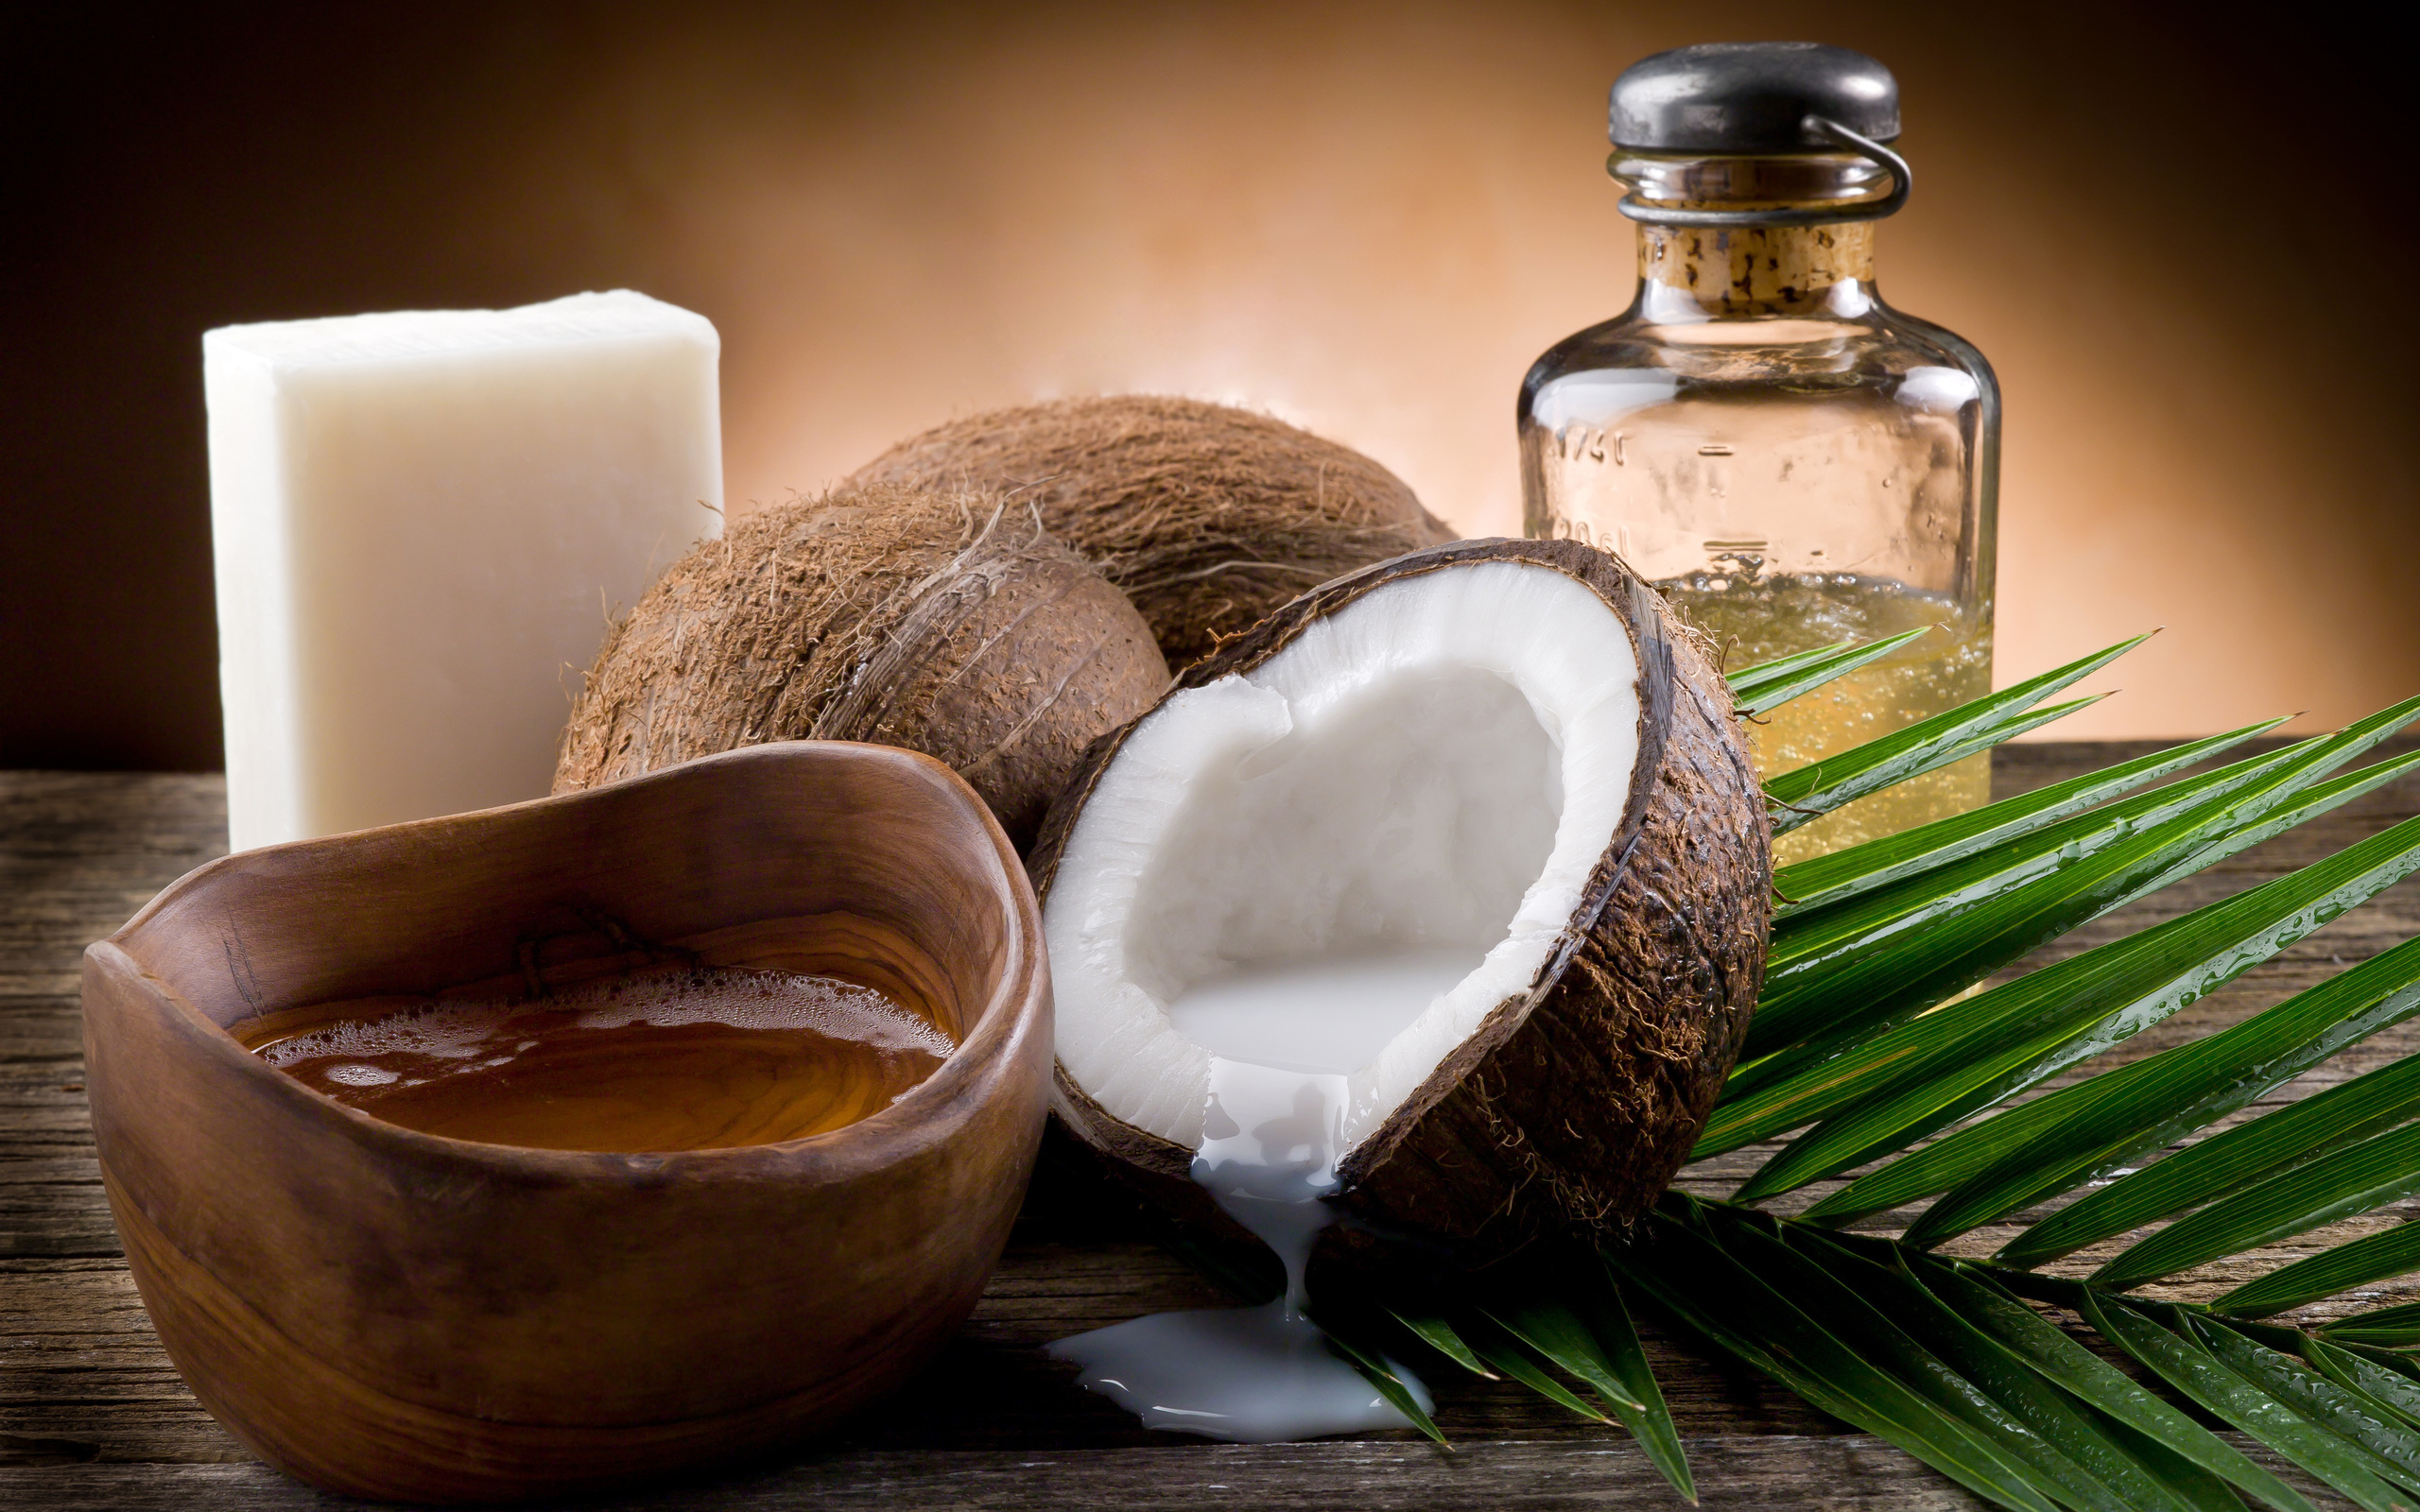 Coconut: High in fat and can be dried or eaten fresh or processed into milk or oil. 2560x1600 HD Wallpaper.